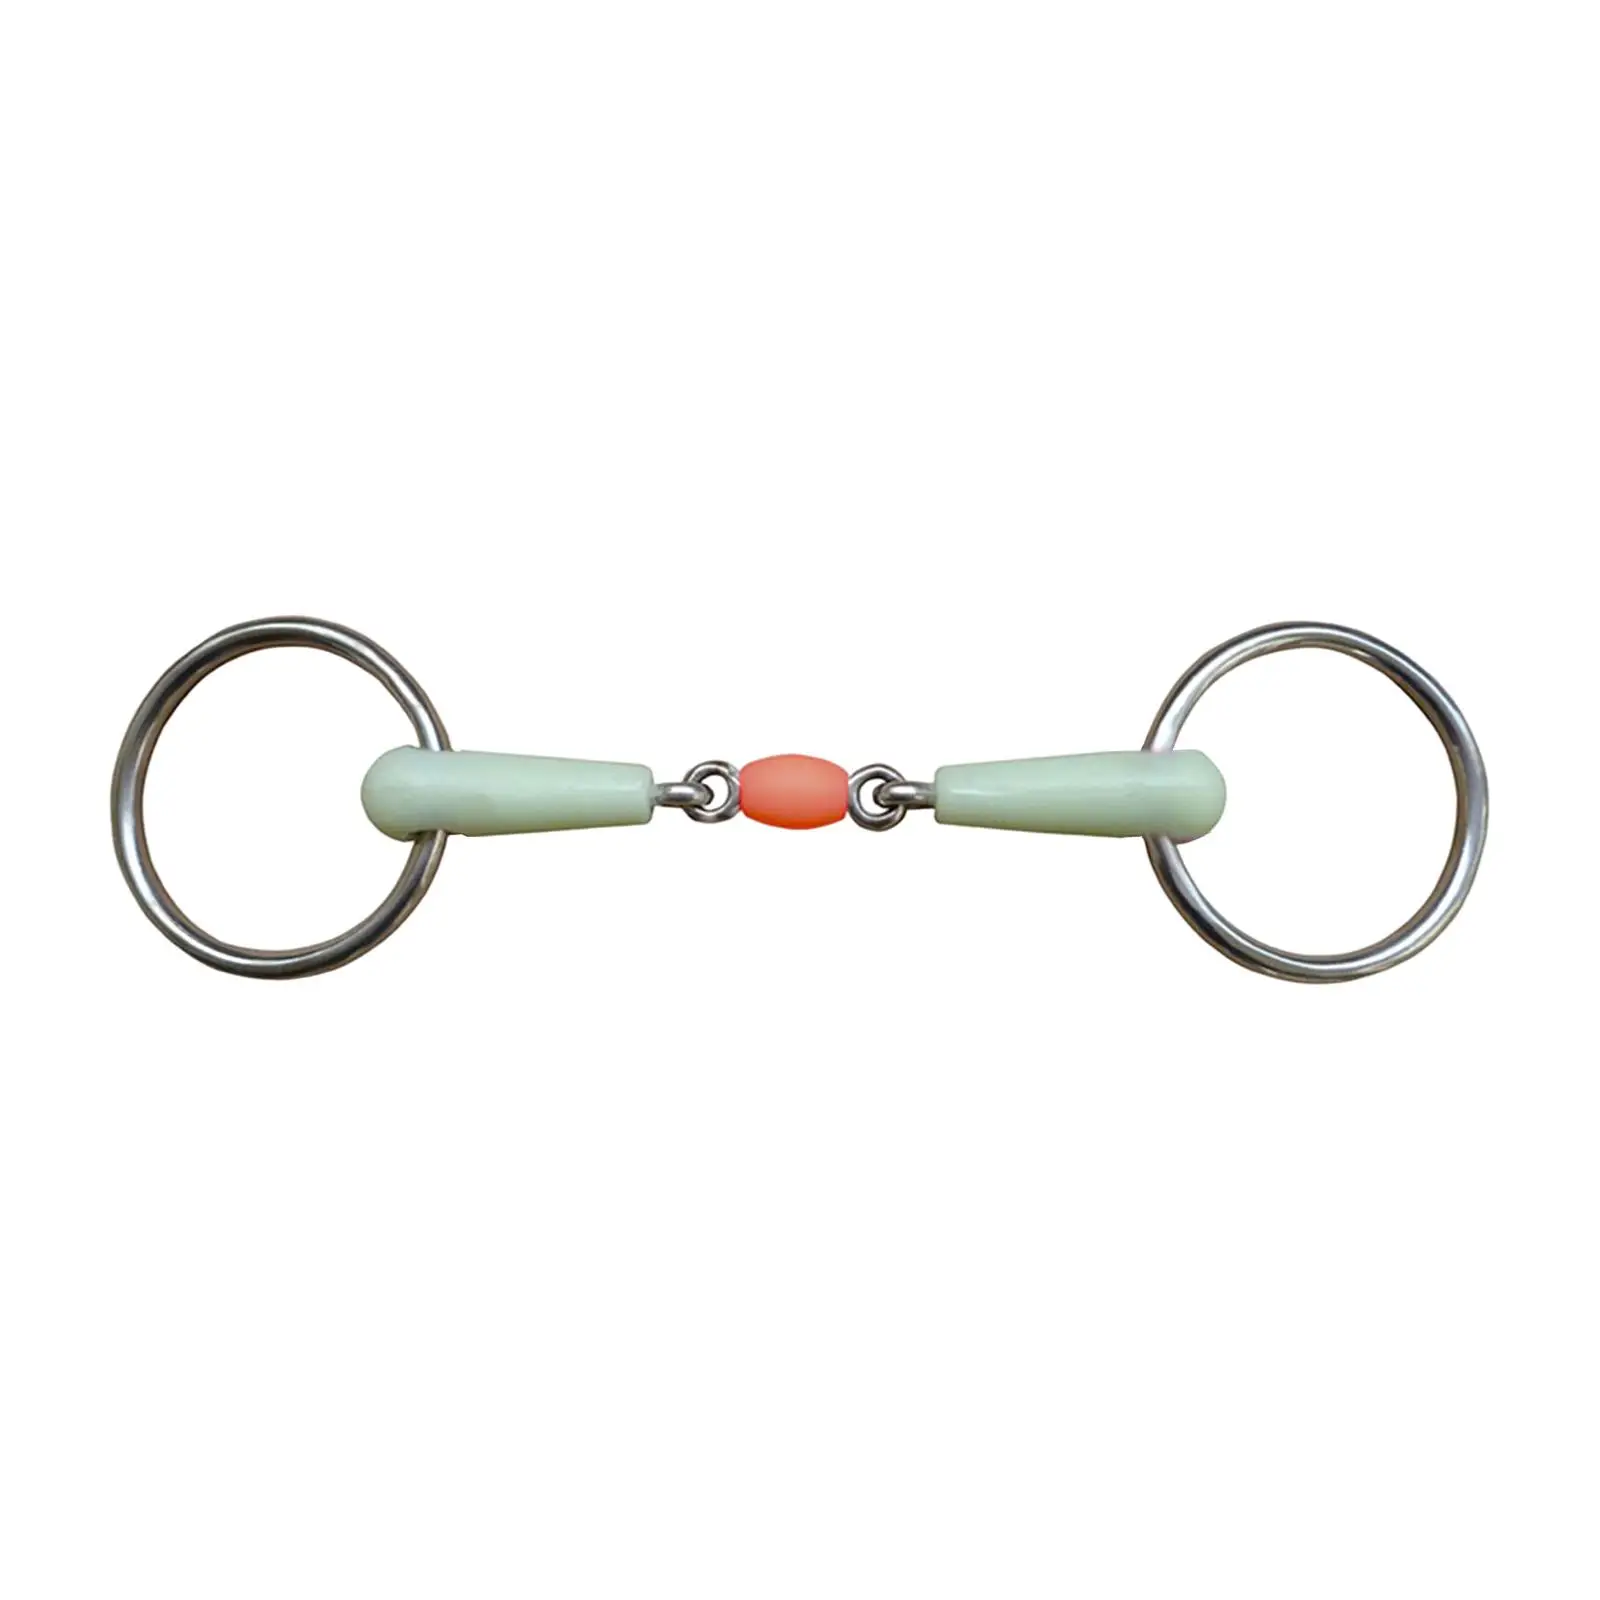 horse Mouth Bit Hollow Supplies Round Harness Equine Flavor Snaffle Bits for performance Cheek Horse Chewing